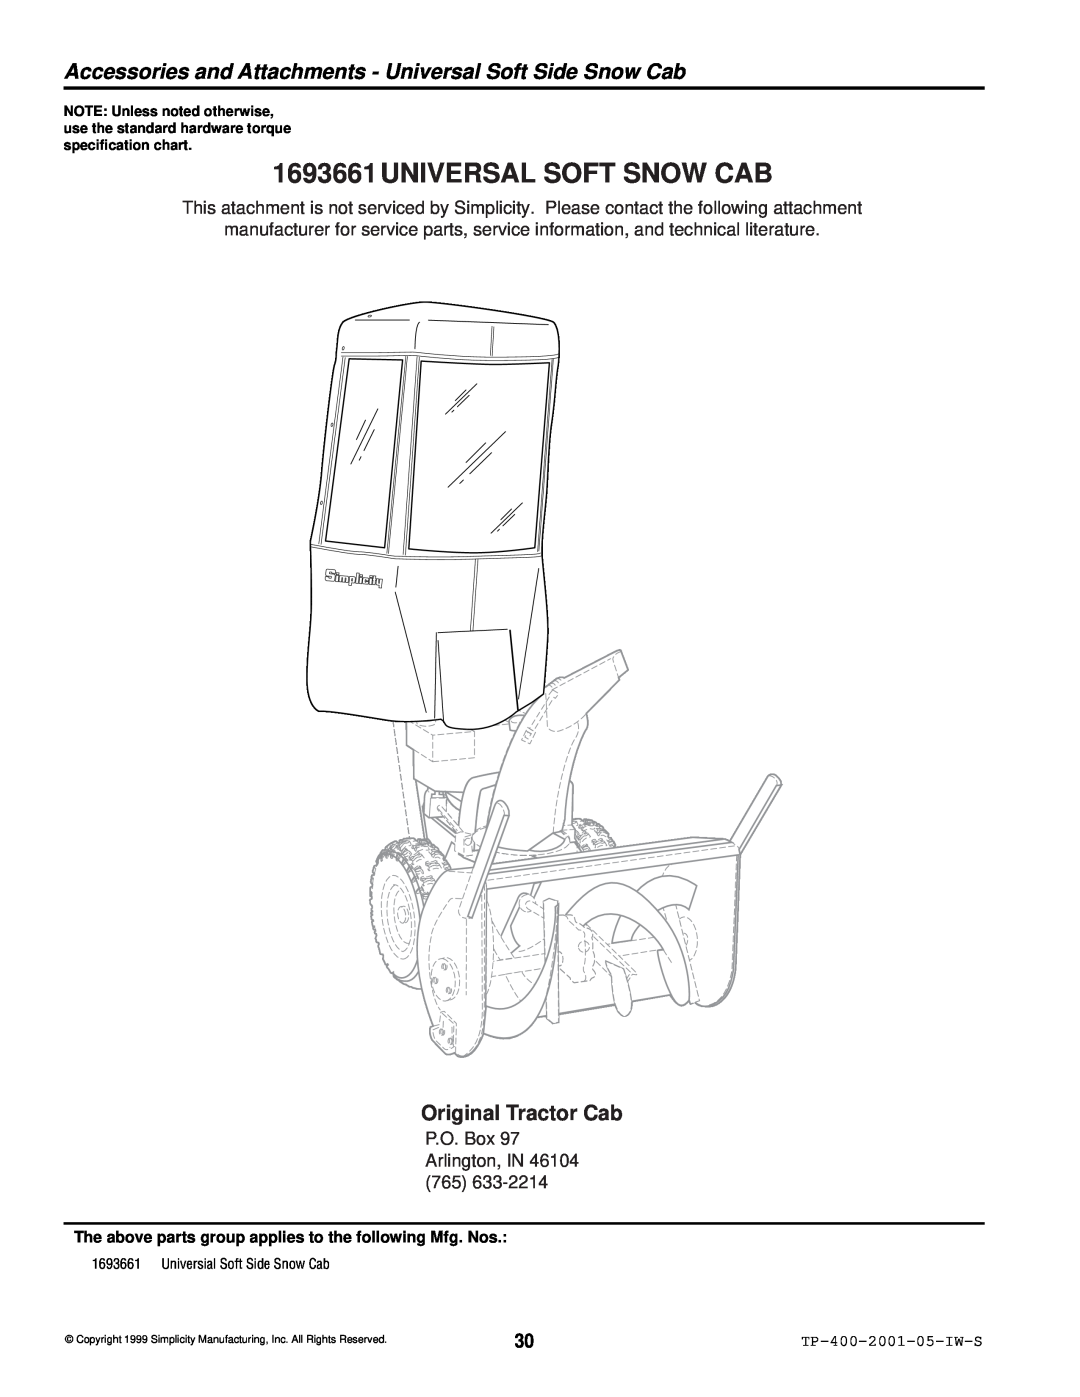 Simplicity 1692680, 1693161 manual R 1 3, Accessories and Attachments - Universal Soft Side Snow Cab, Original Tractor Cab 